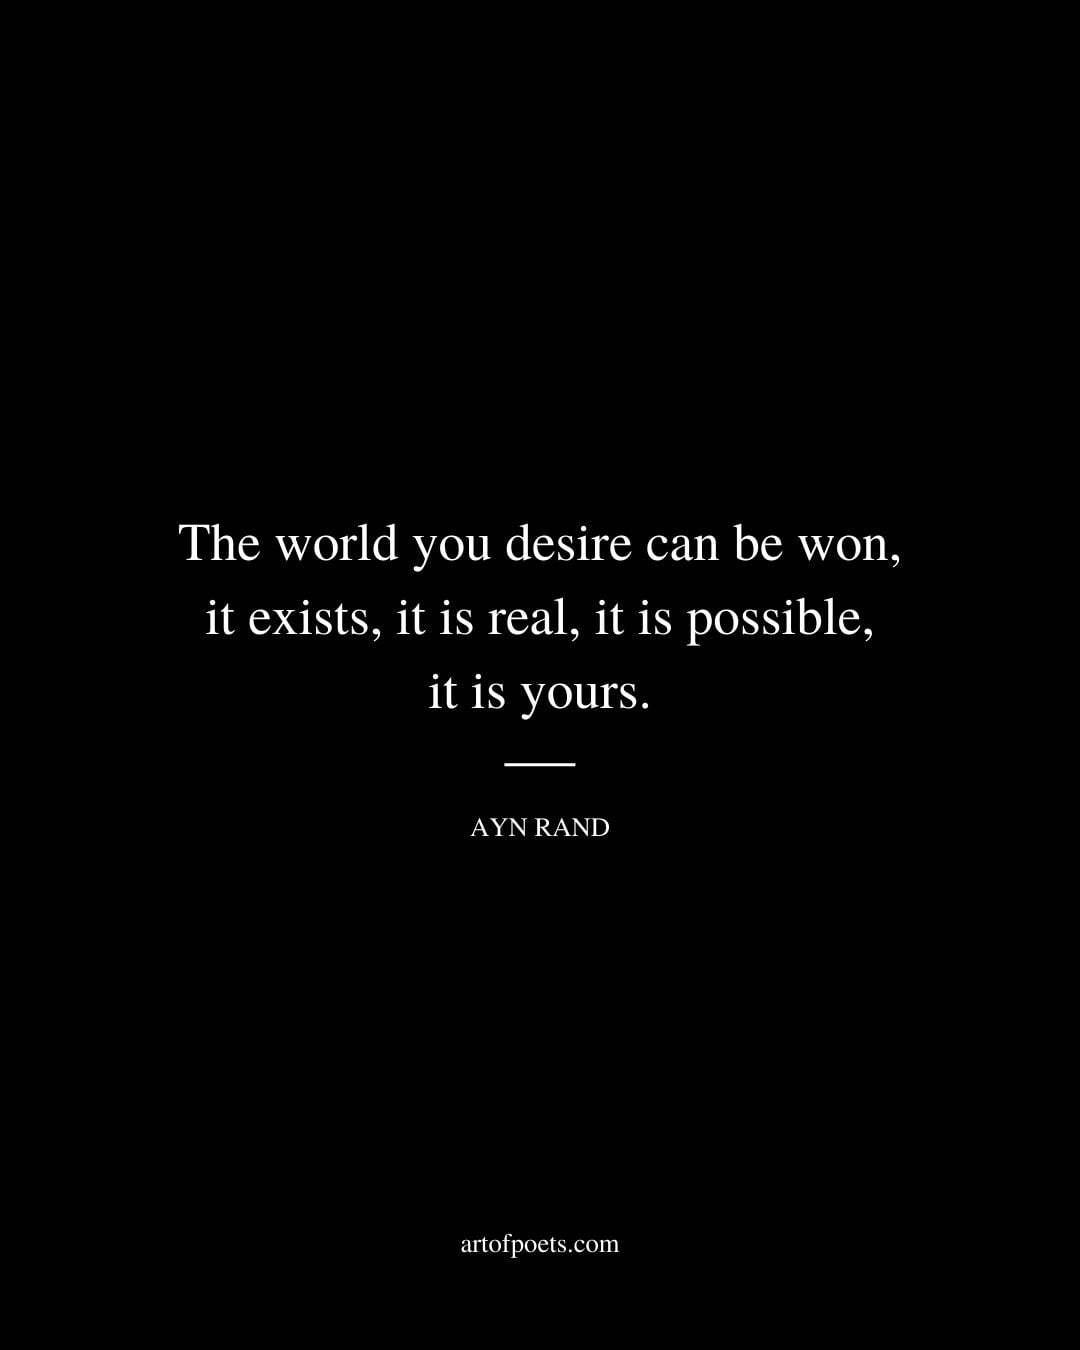 The world you desire can be won it exists it is real it is possible it is yours